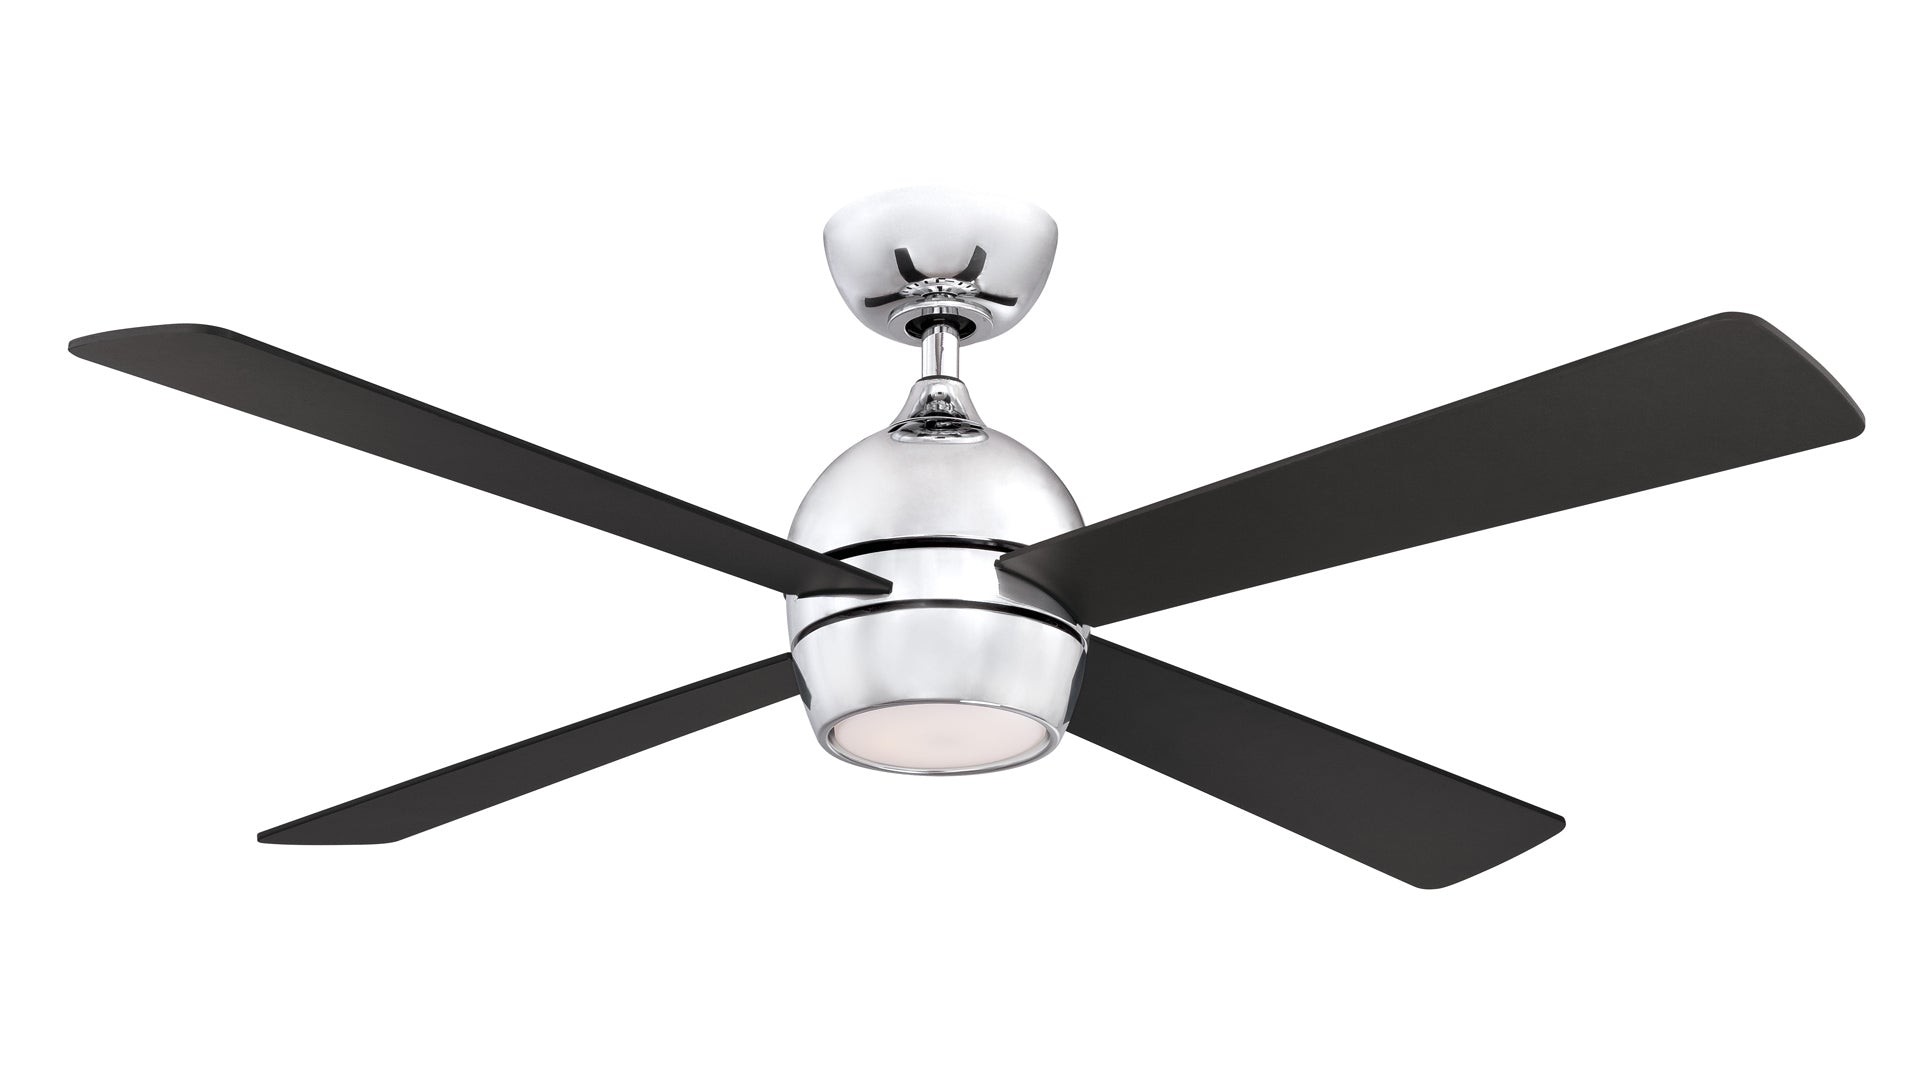 Fanimation Kwad FP7652CH 52 inch Ceiling Fan with LED Light and Remote - Chrome